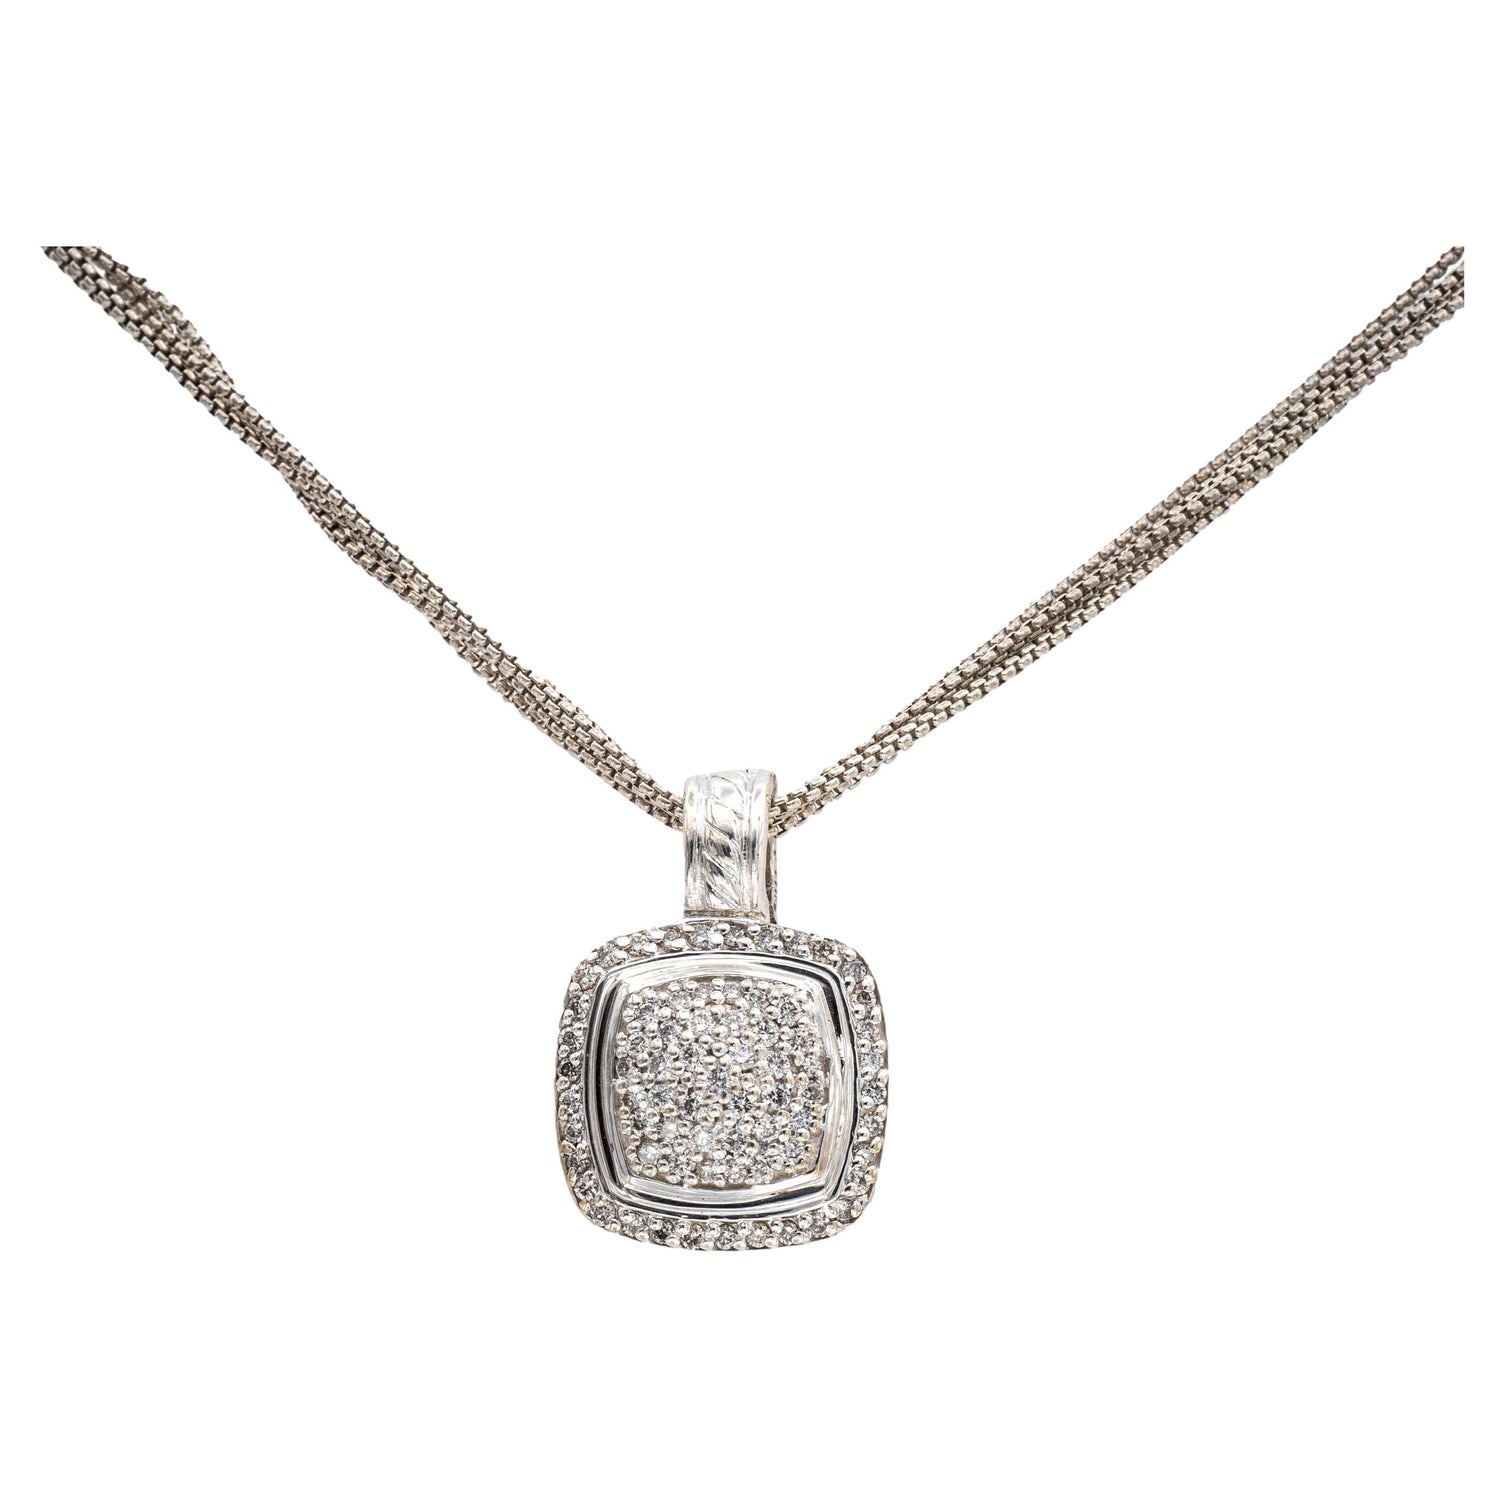 Tiffany & Co. Sterling Silver Nike NWM SF 07 Charm Necklace 16.25 Chain  — DeWitt's Diamond & Gold Exchange